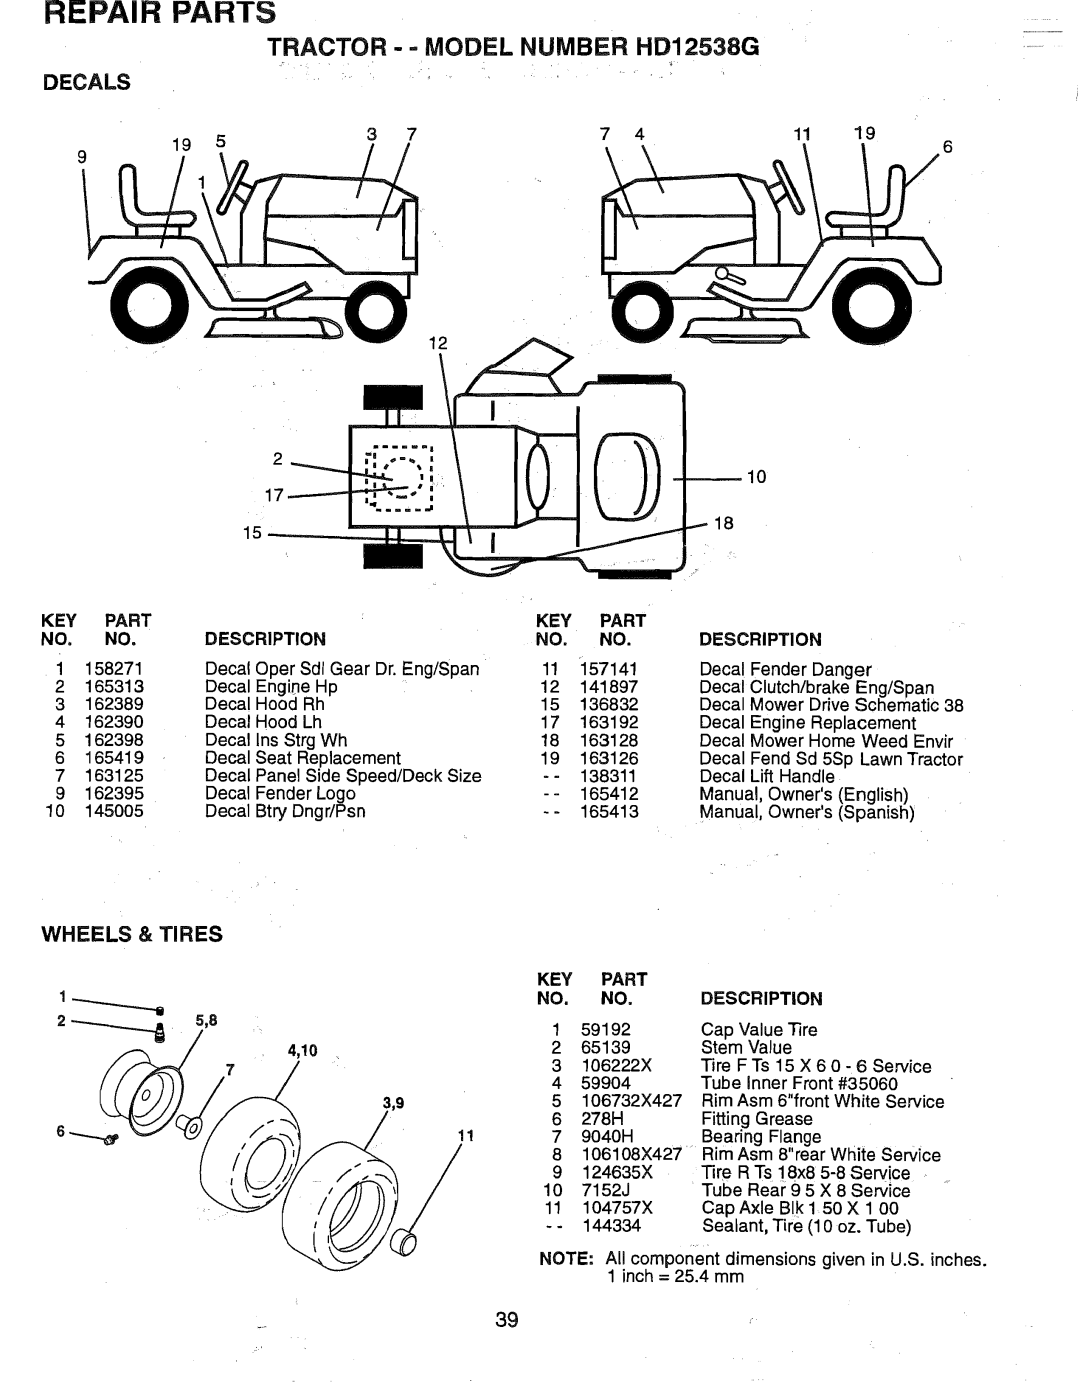 Weed Eater 165412 manual Decals, Wheels & Tires, Description, Repair Parts, TRACTOR - - MODEL NUMBER HD12538G 